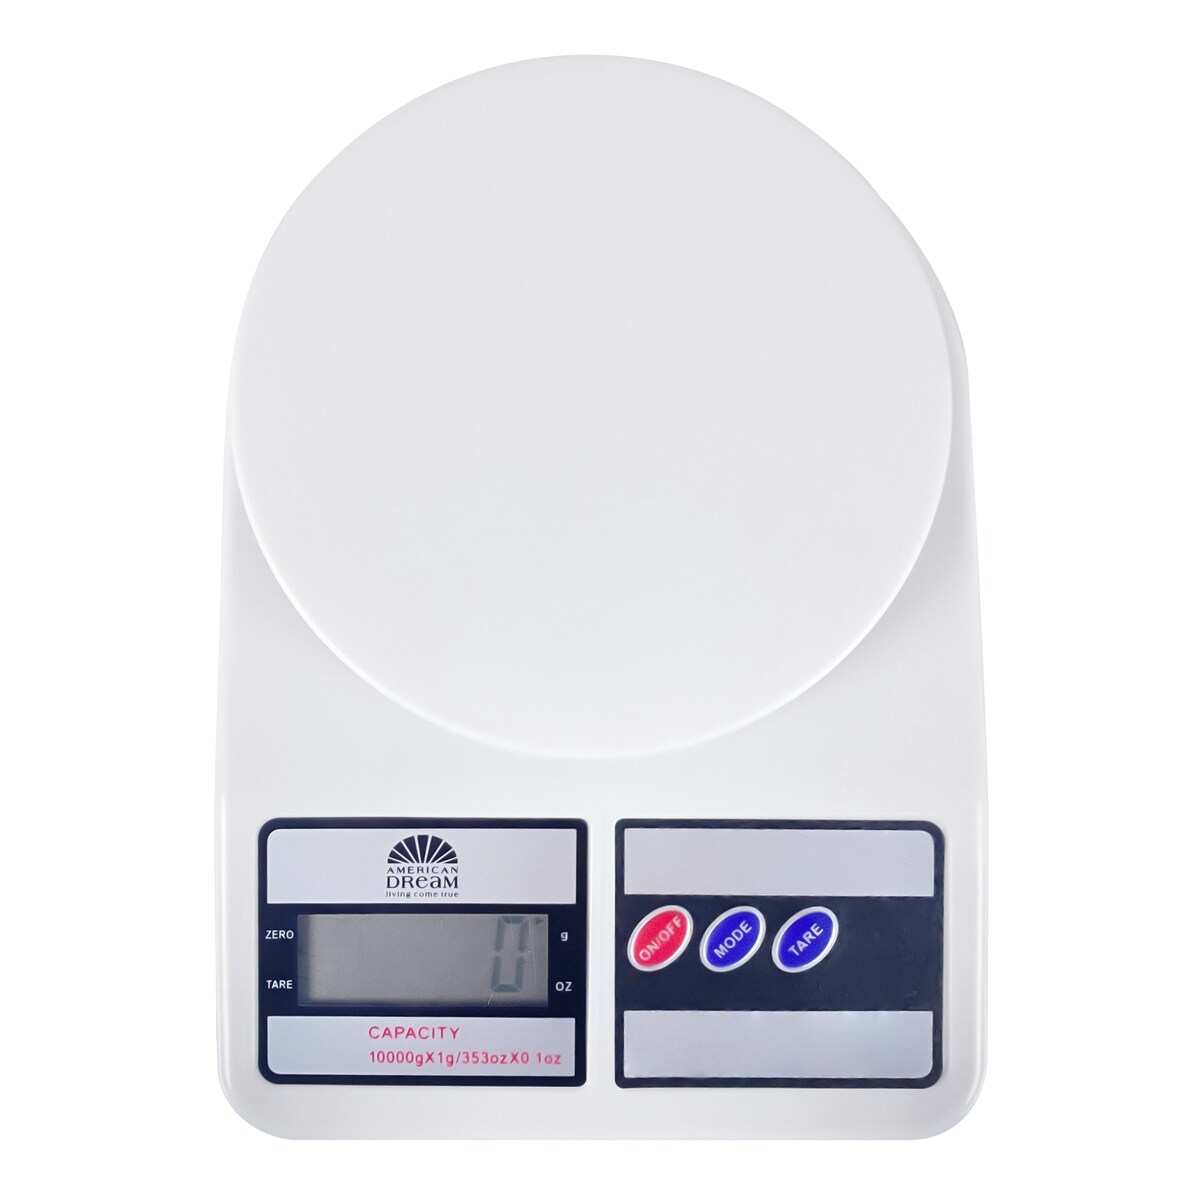 Digital scale Rulers & Measuring Devices at